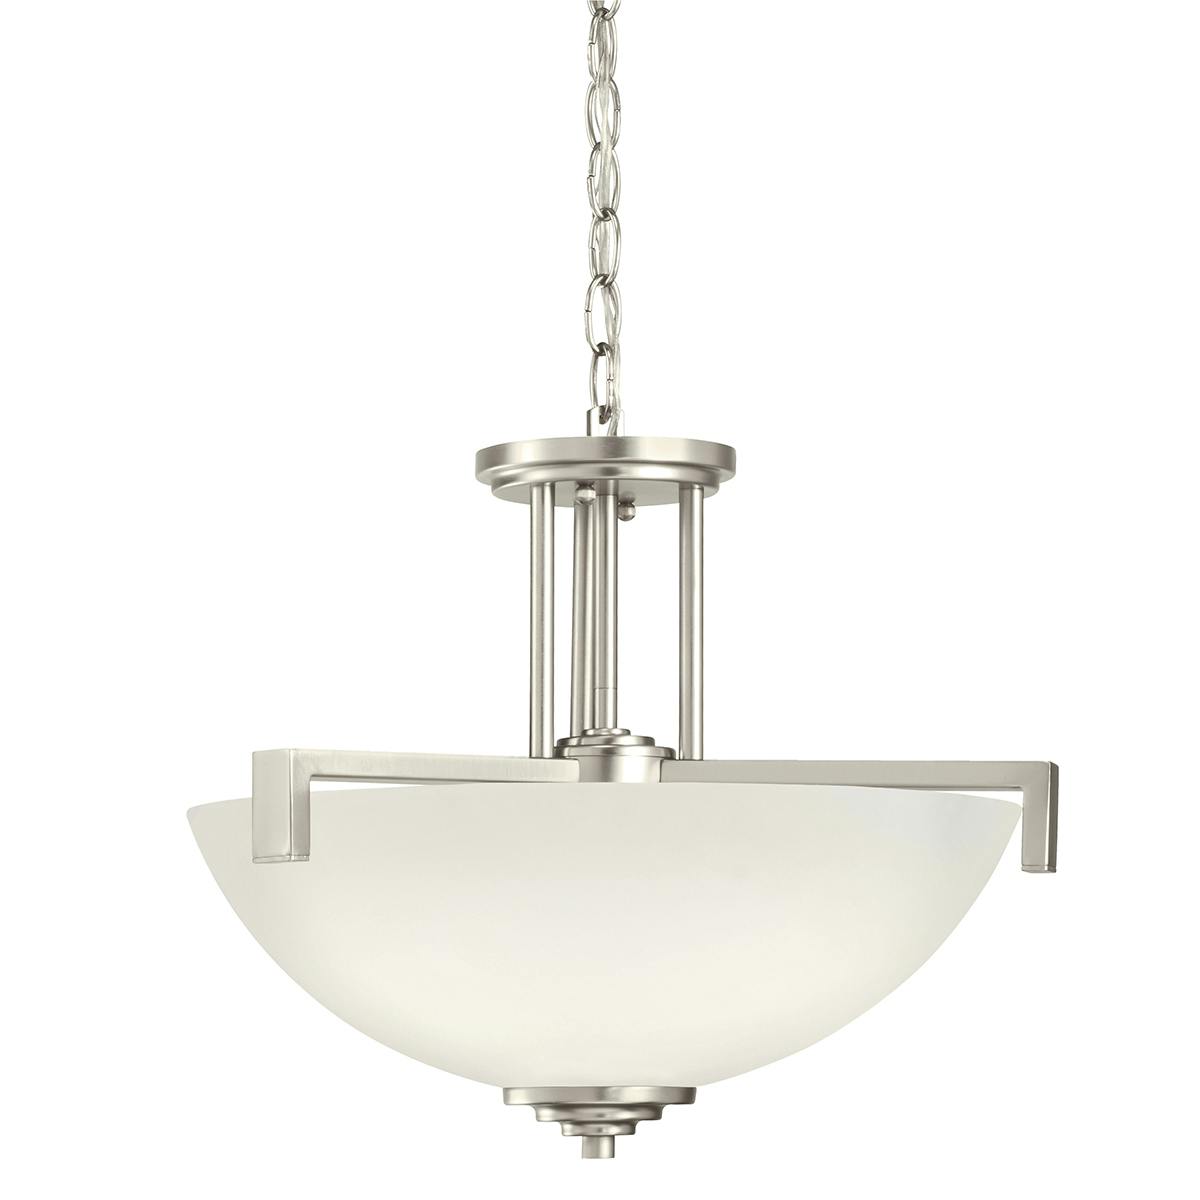 Product image of the 3797NIL18 shown hung as a pendant